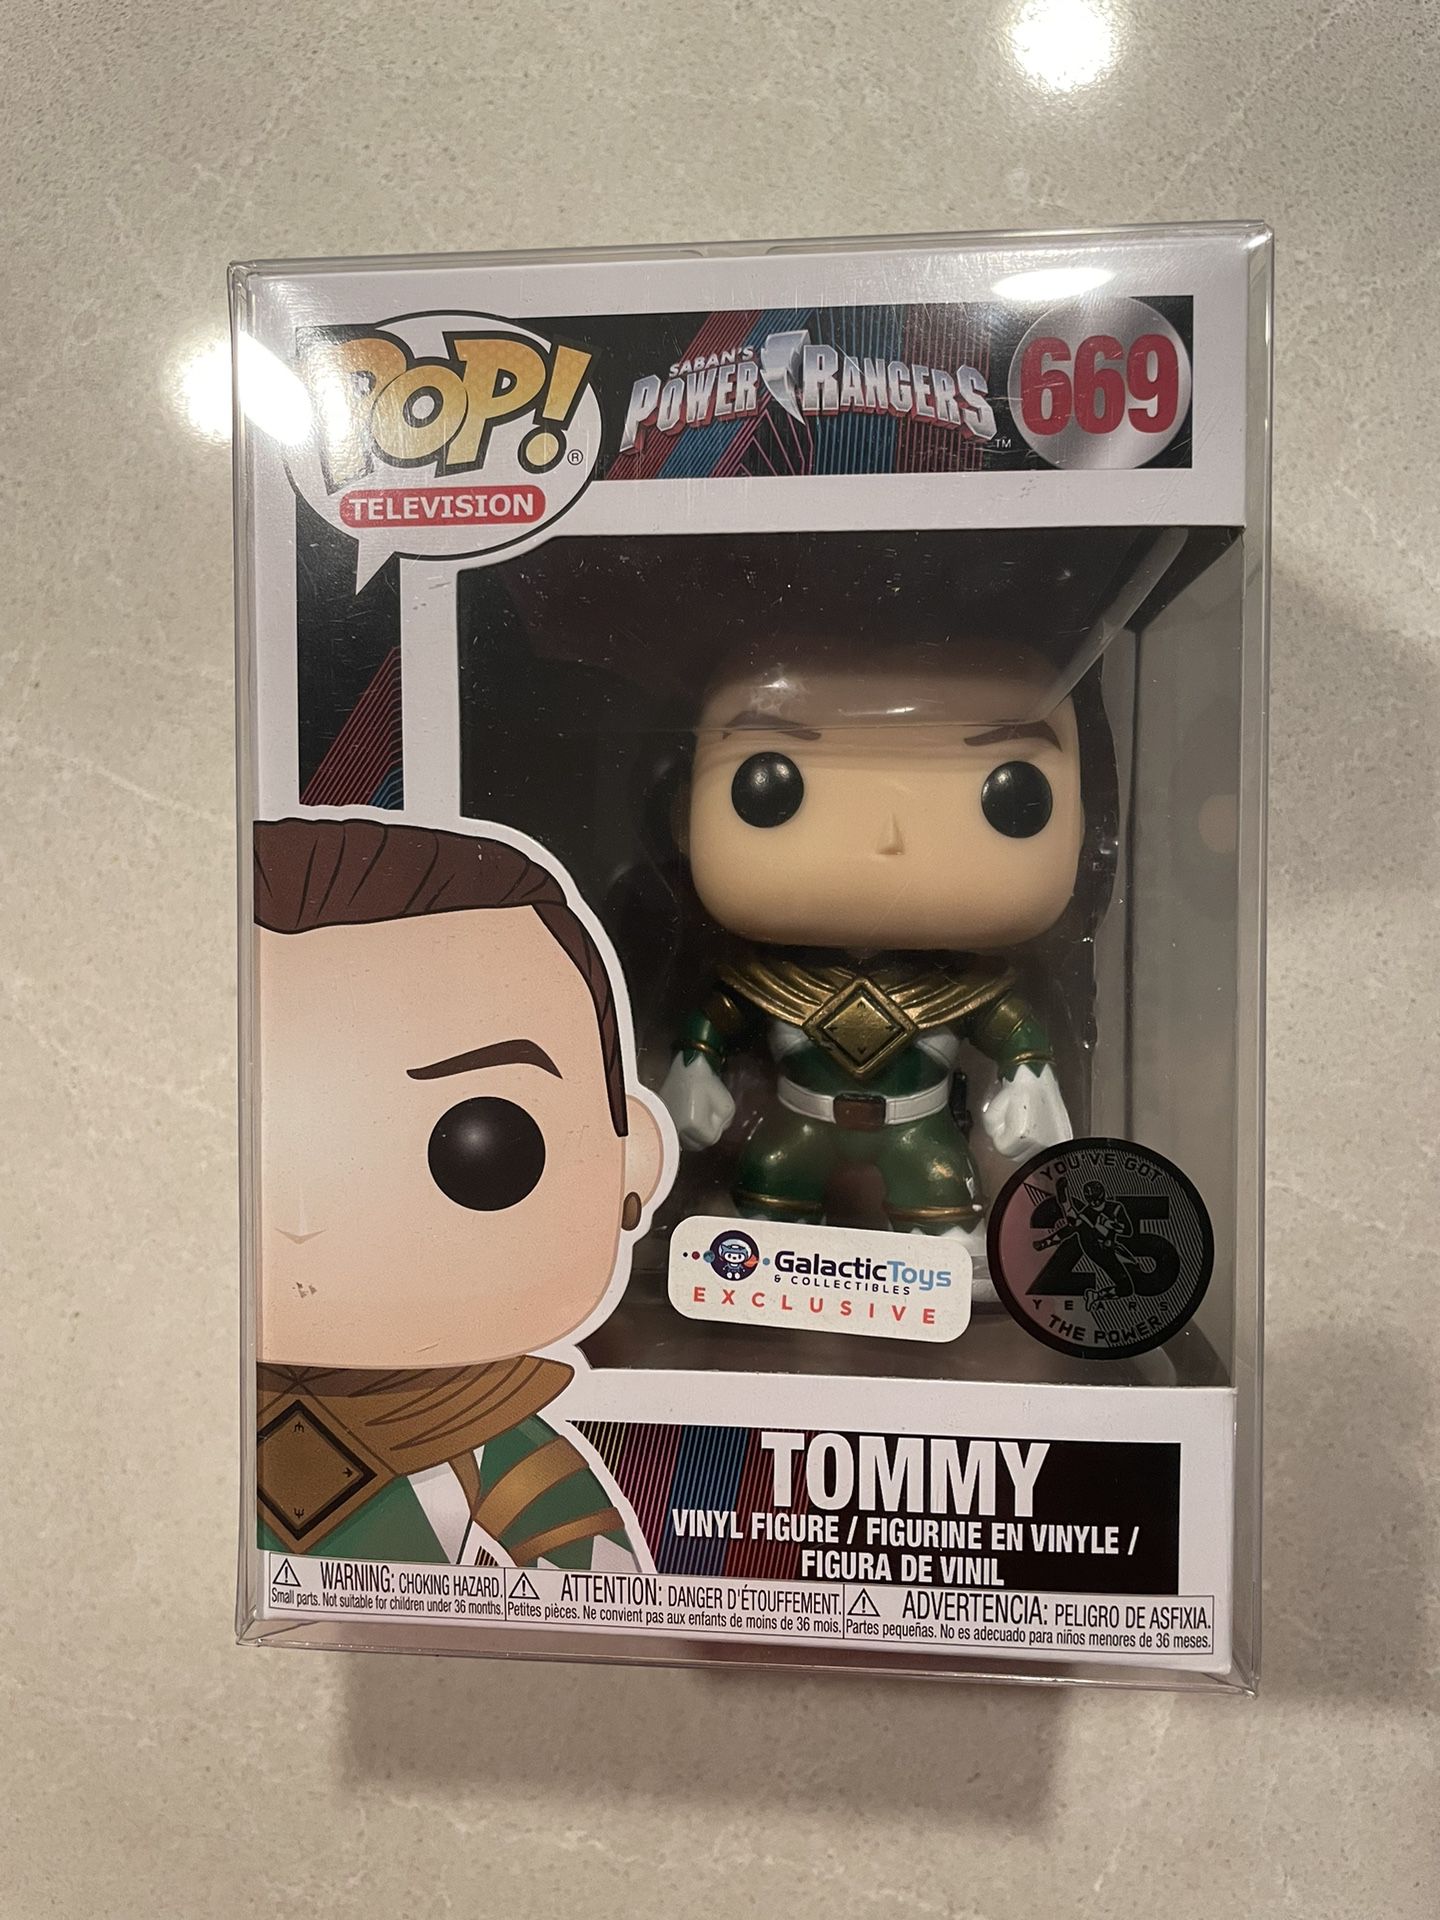 Metallic Green Ranger Tommy Funko Pop *MINT* Galactic Toys Exclusive MMPR Mighty Morphin Power Rangers 669 with protector Unmasked Television